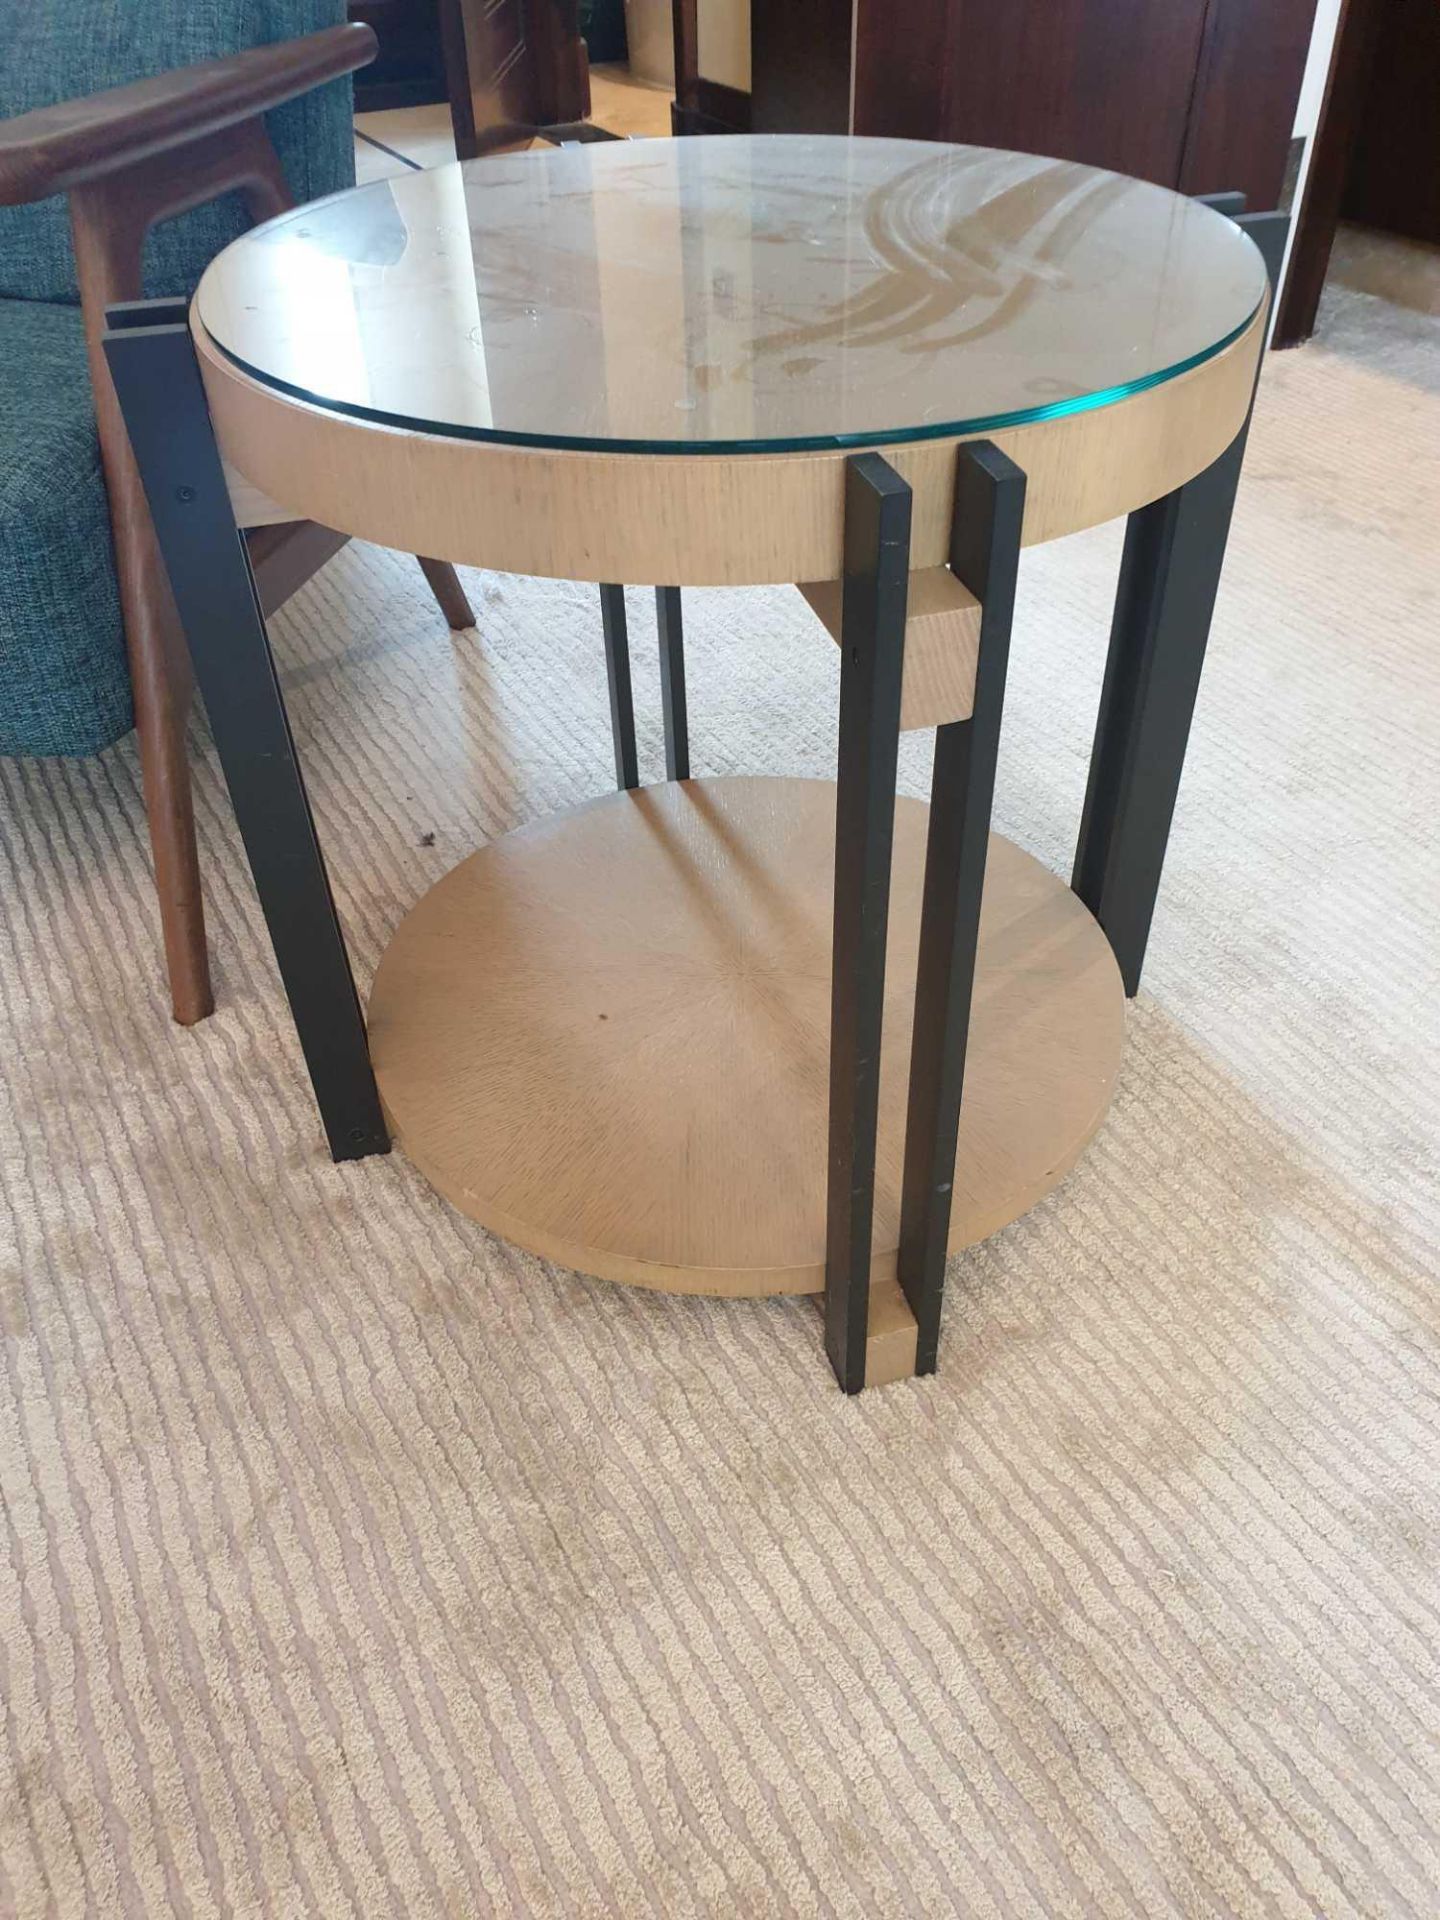 A Contemporary Side Table With Glass Top 61 x 57cm - Image 5 of 6